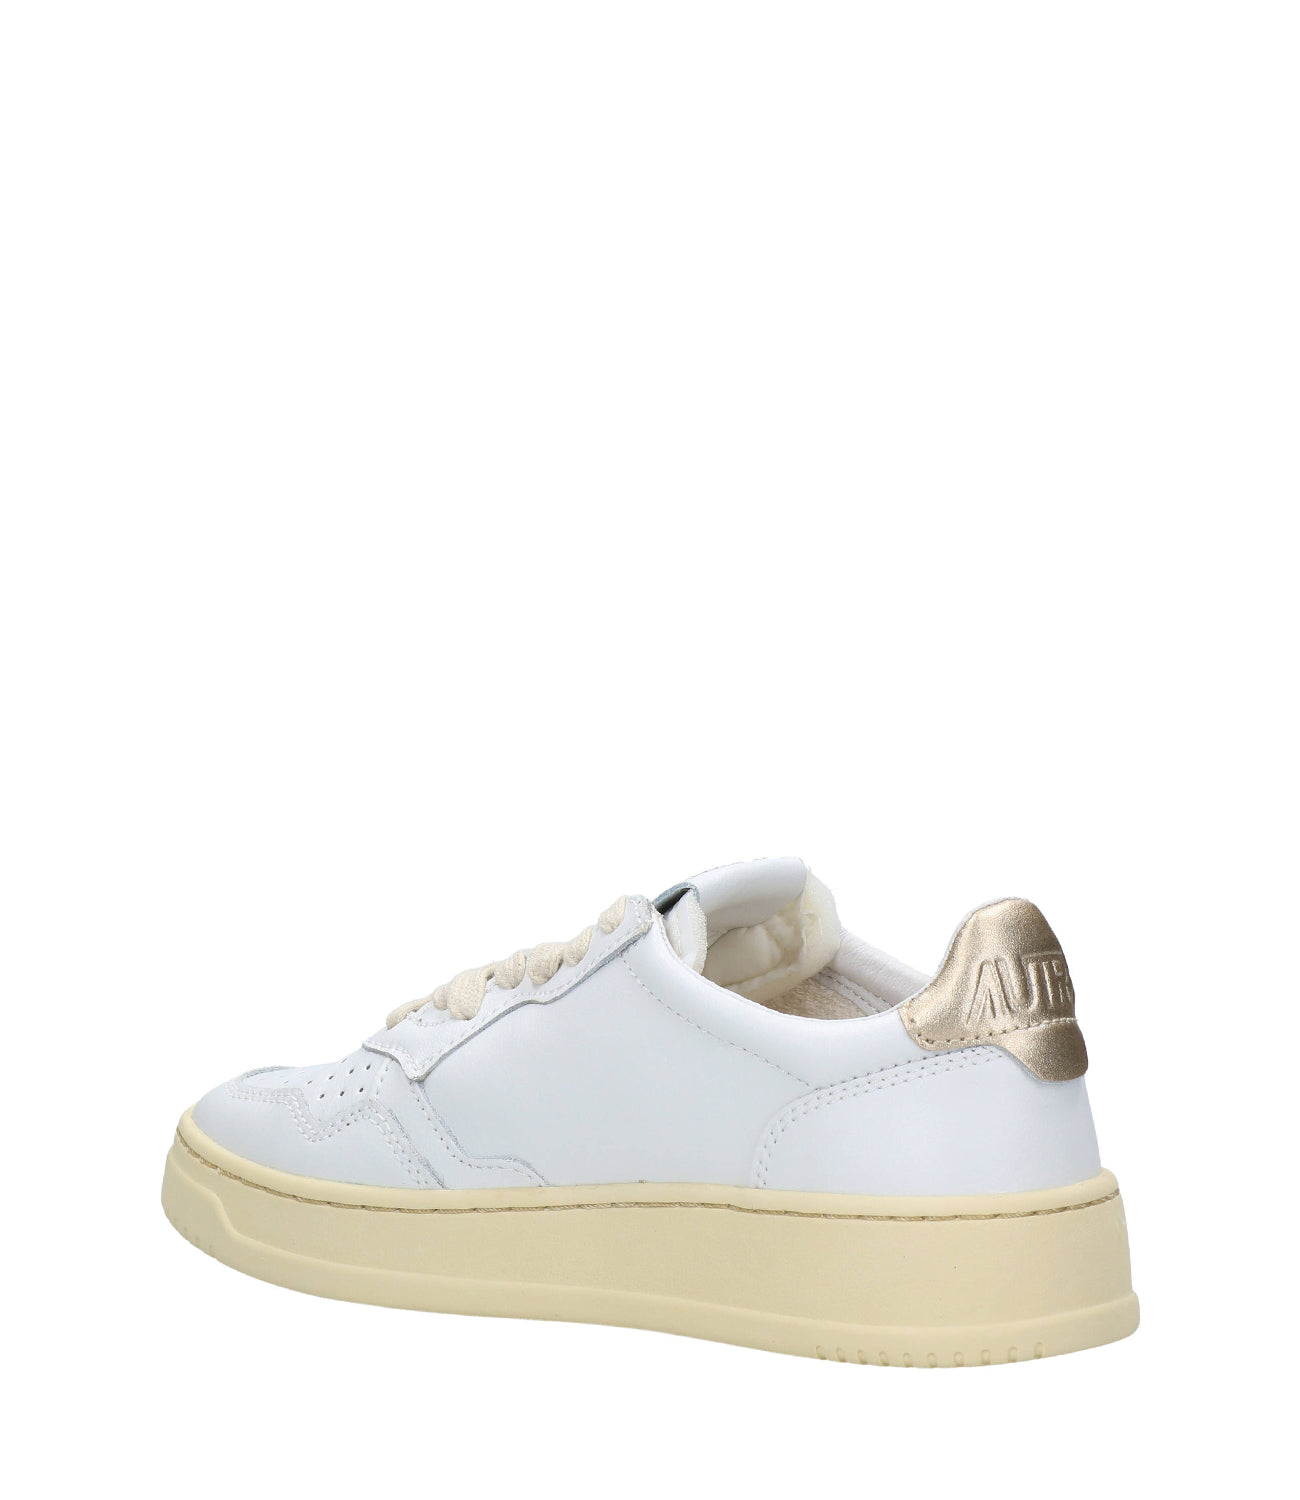 Autry | Medalist Low White and Gold Sneakers